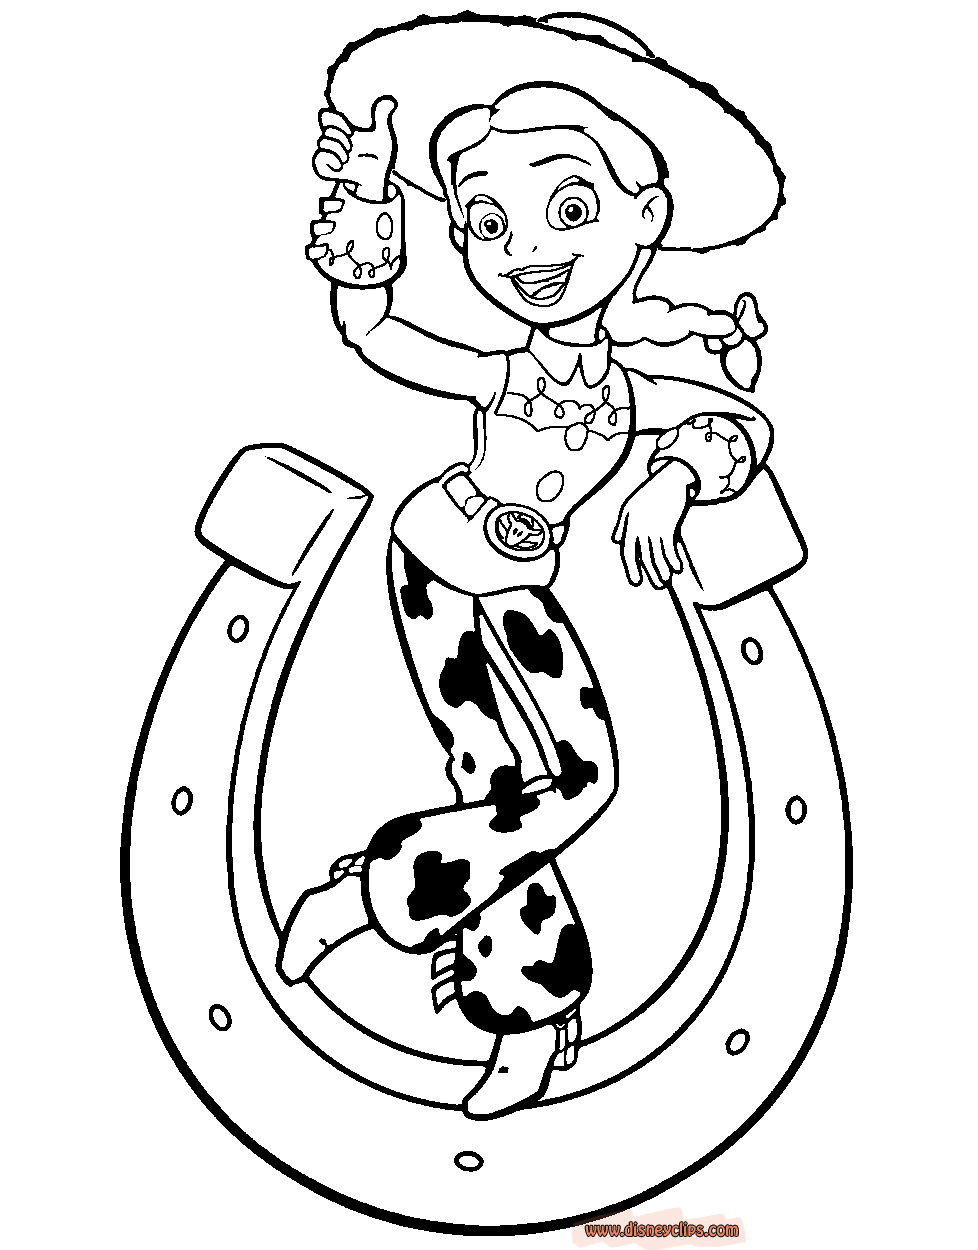 Download Toy Story Coloring Pages | Disneyclips.com